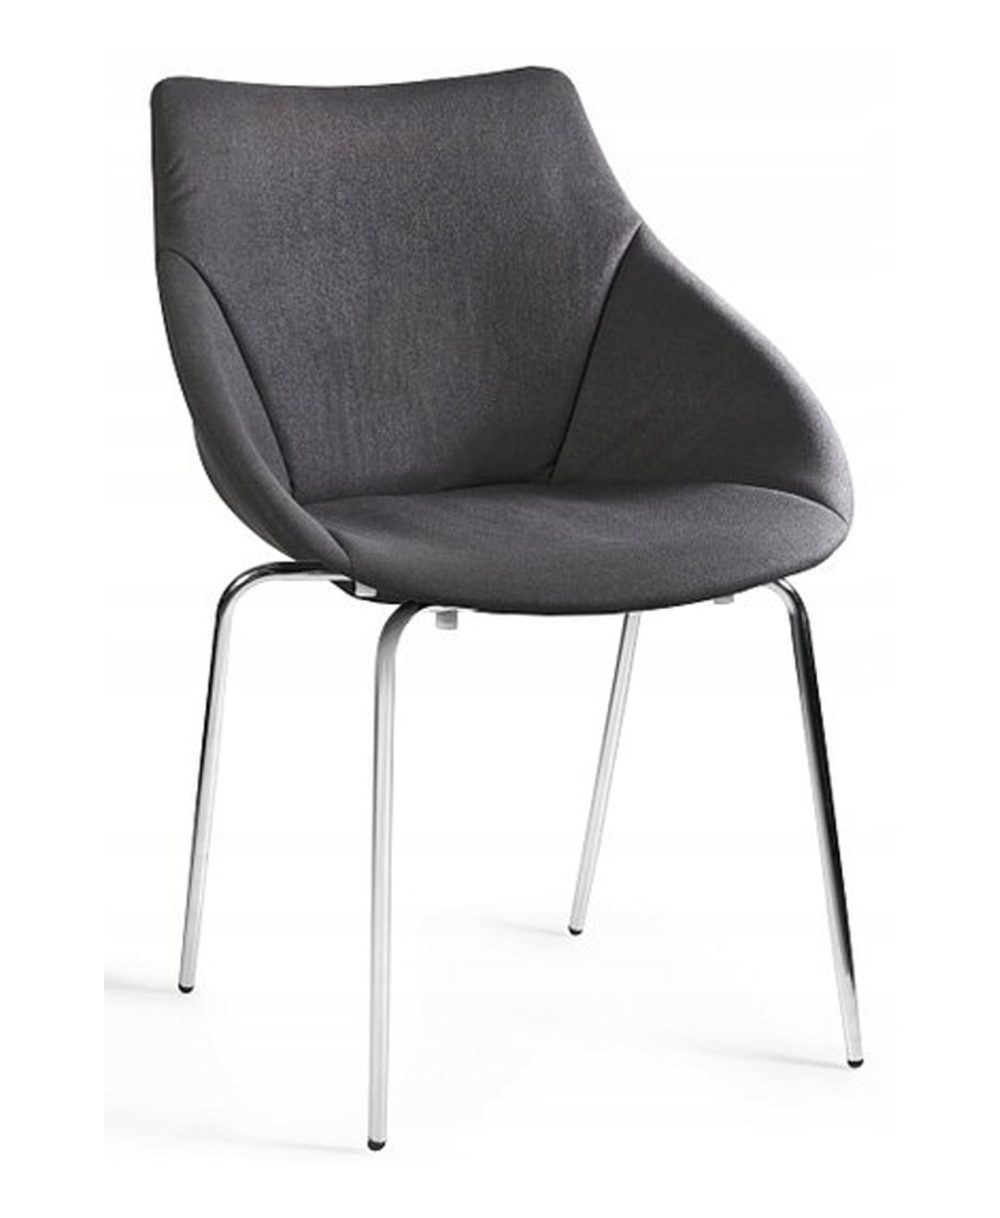 dove-chair-side